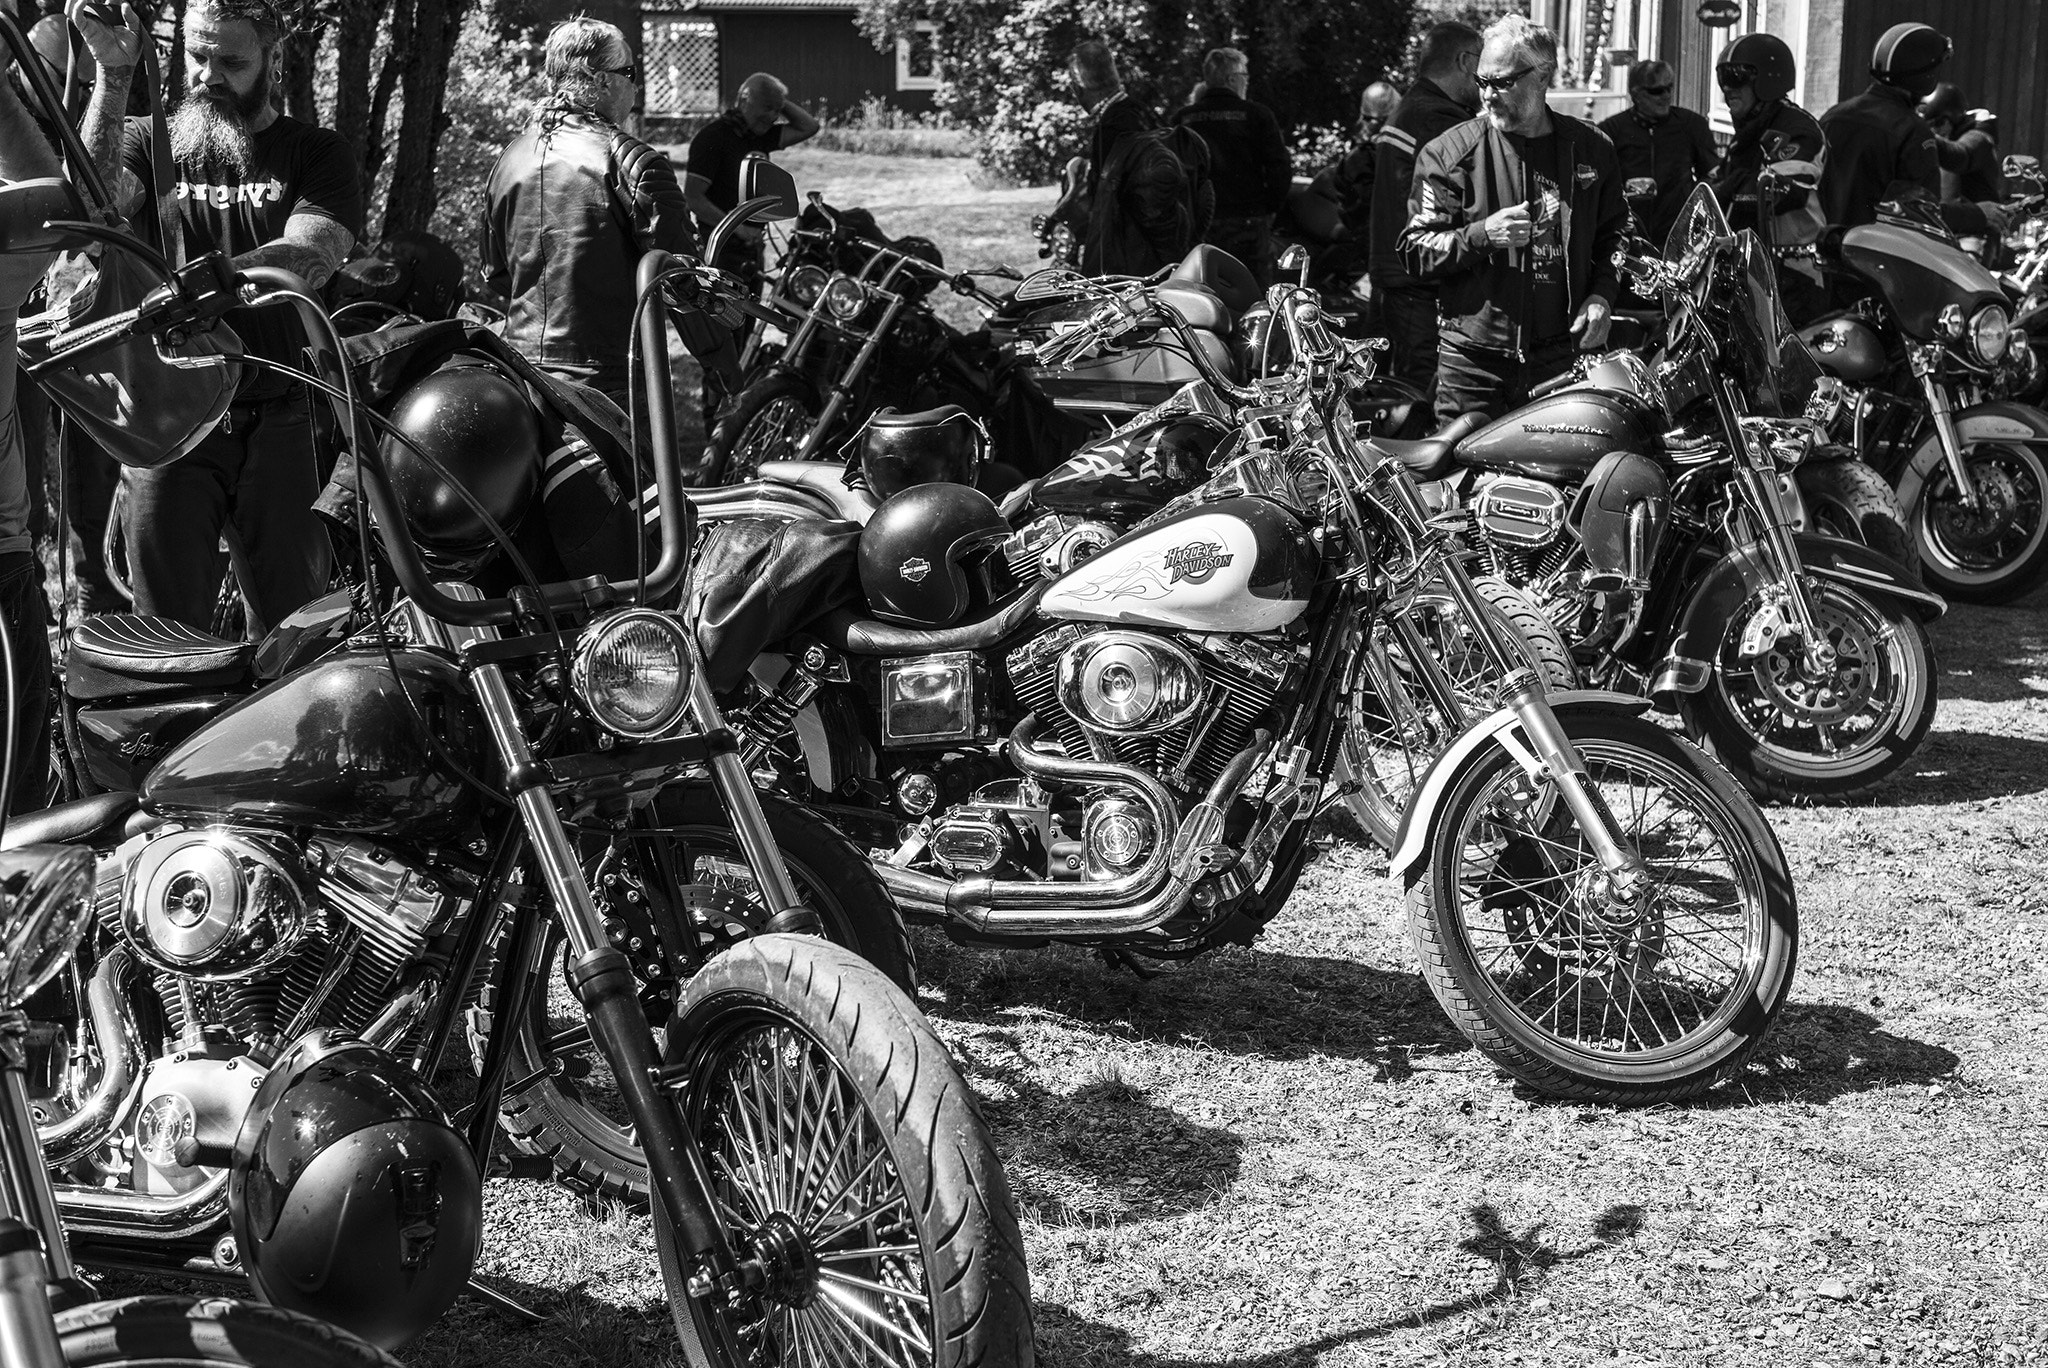 Leica M (Typ 240) sample photo. Bikers raise money for the lions cancer research fund photography